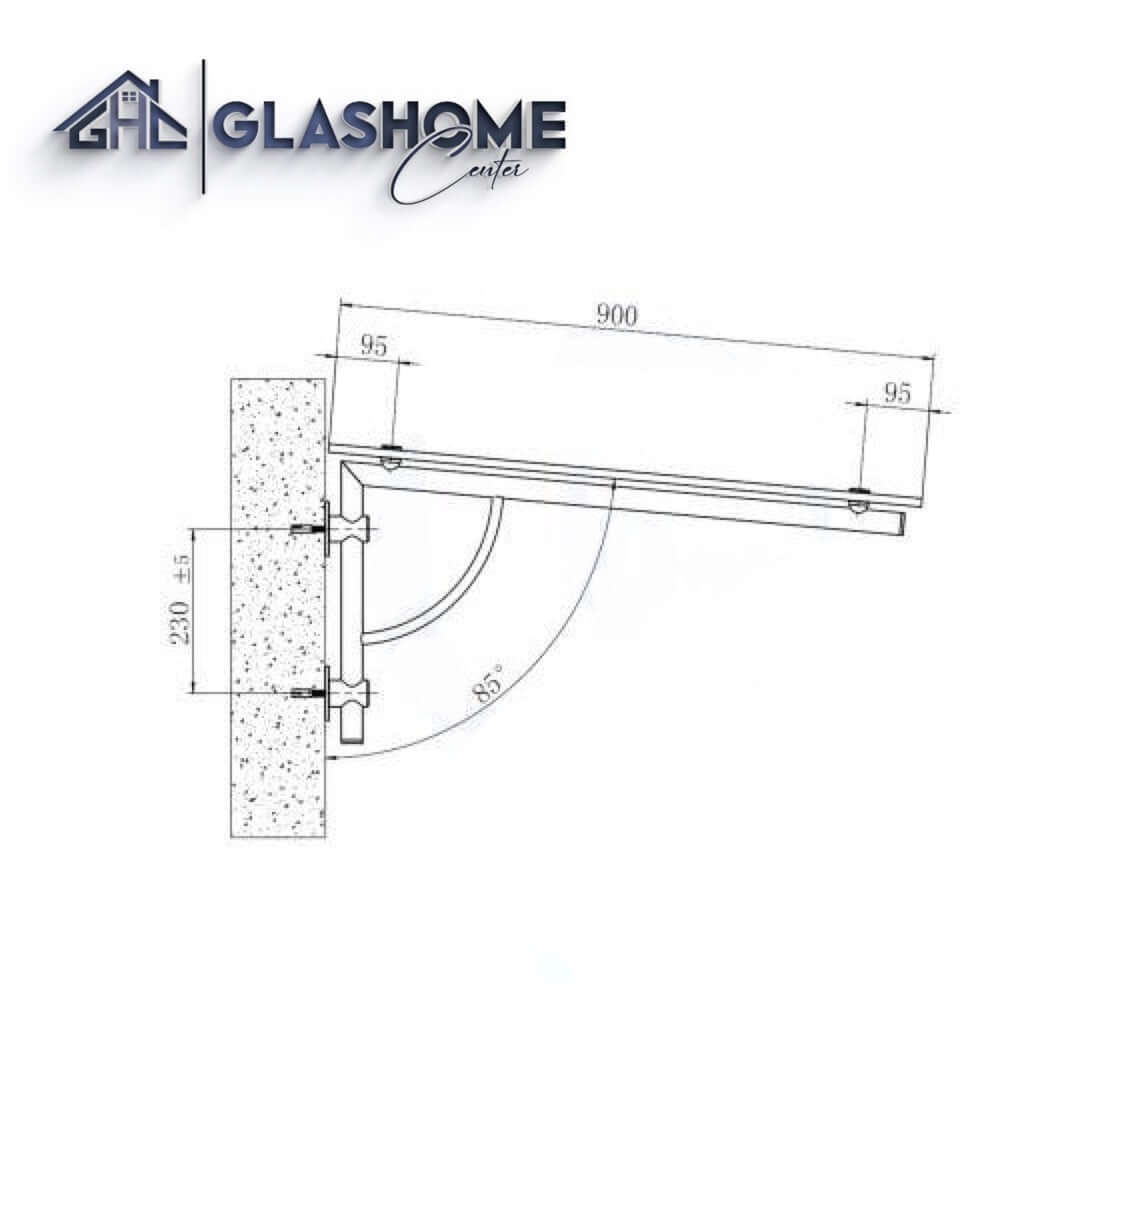 GlasHomeCenter - glass canopy - gray glass - 200x90cm - 13.1mm laminated safety glass - incl. 2 stainless steel brackets variant "Athen"